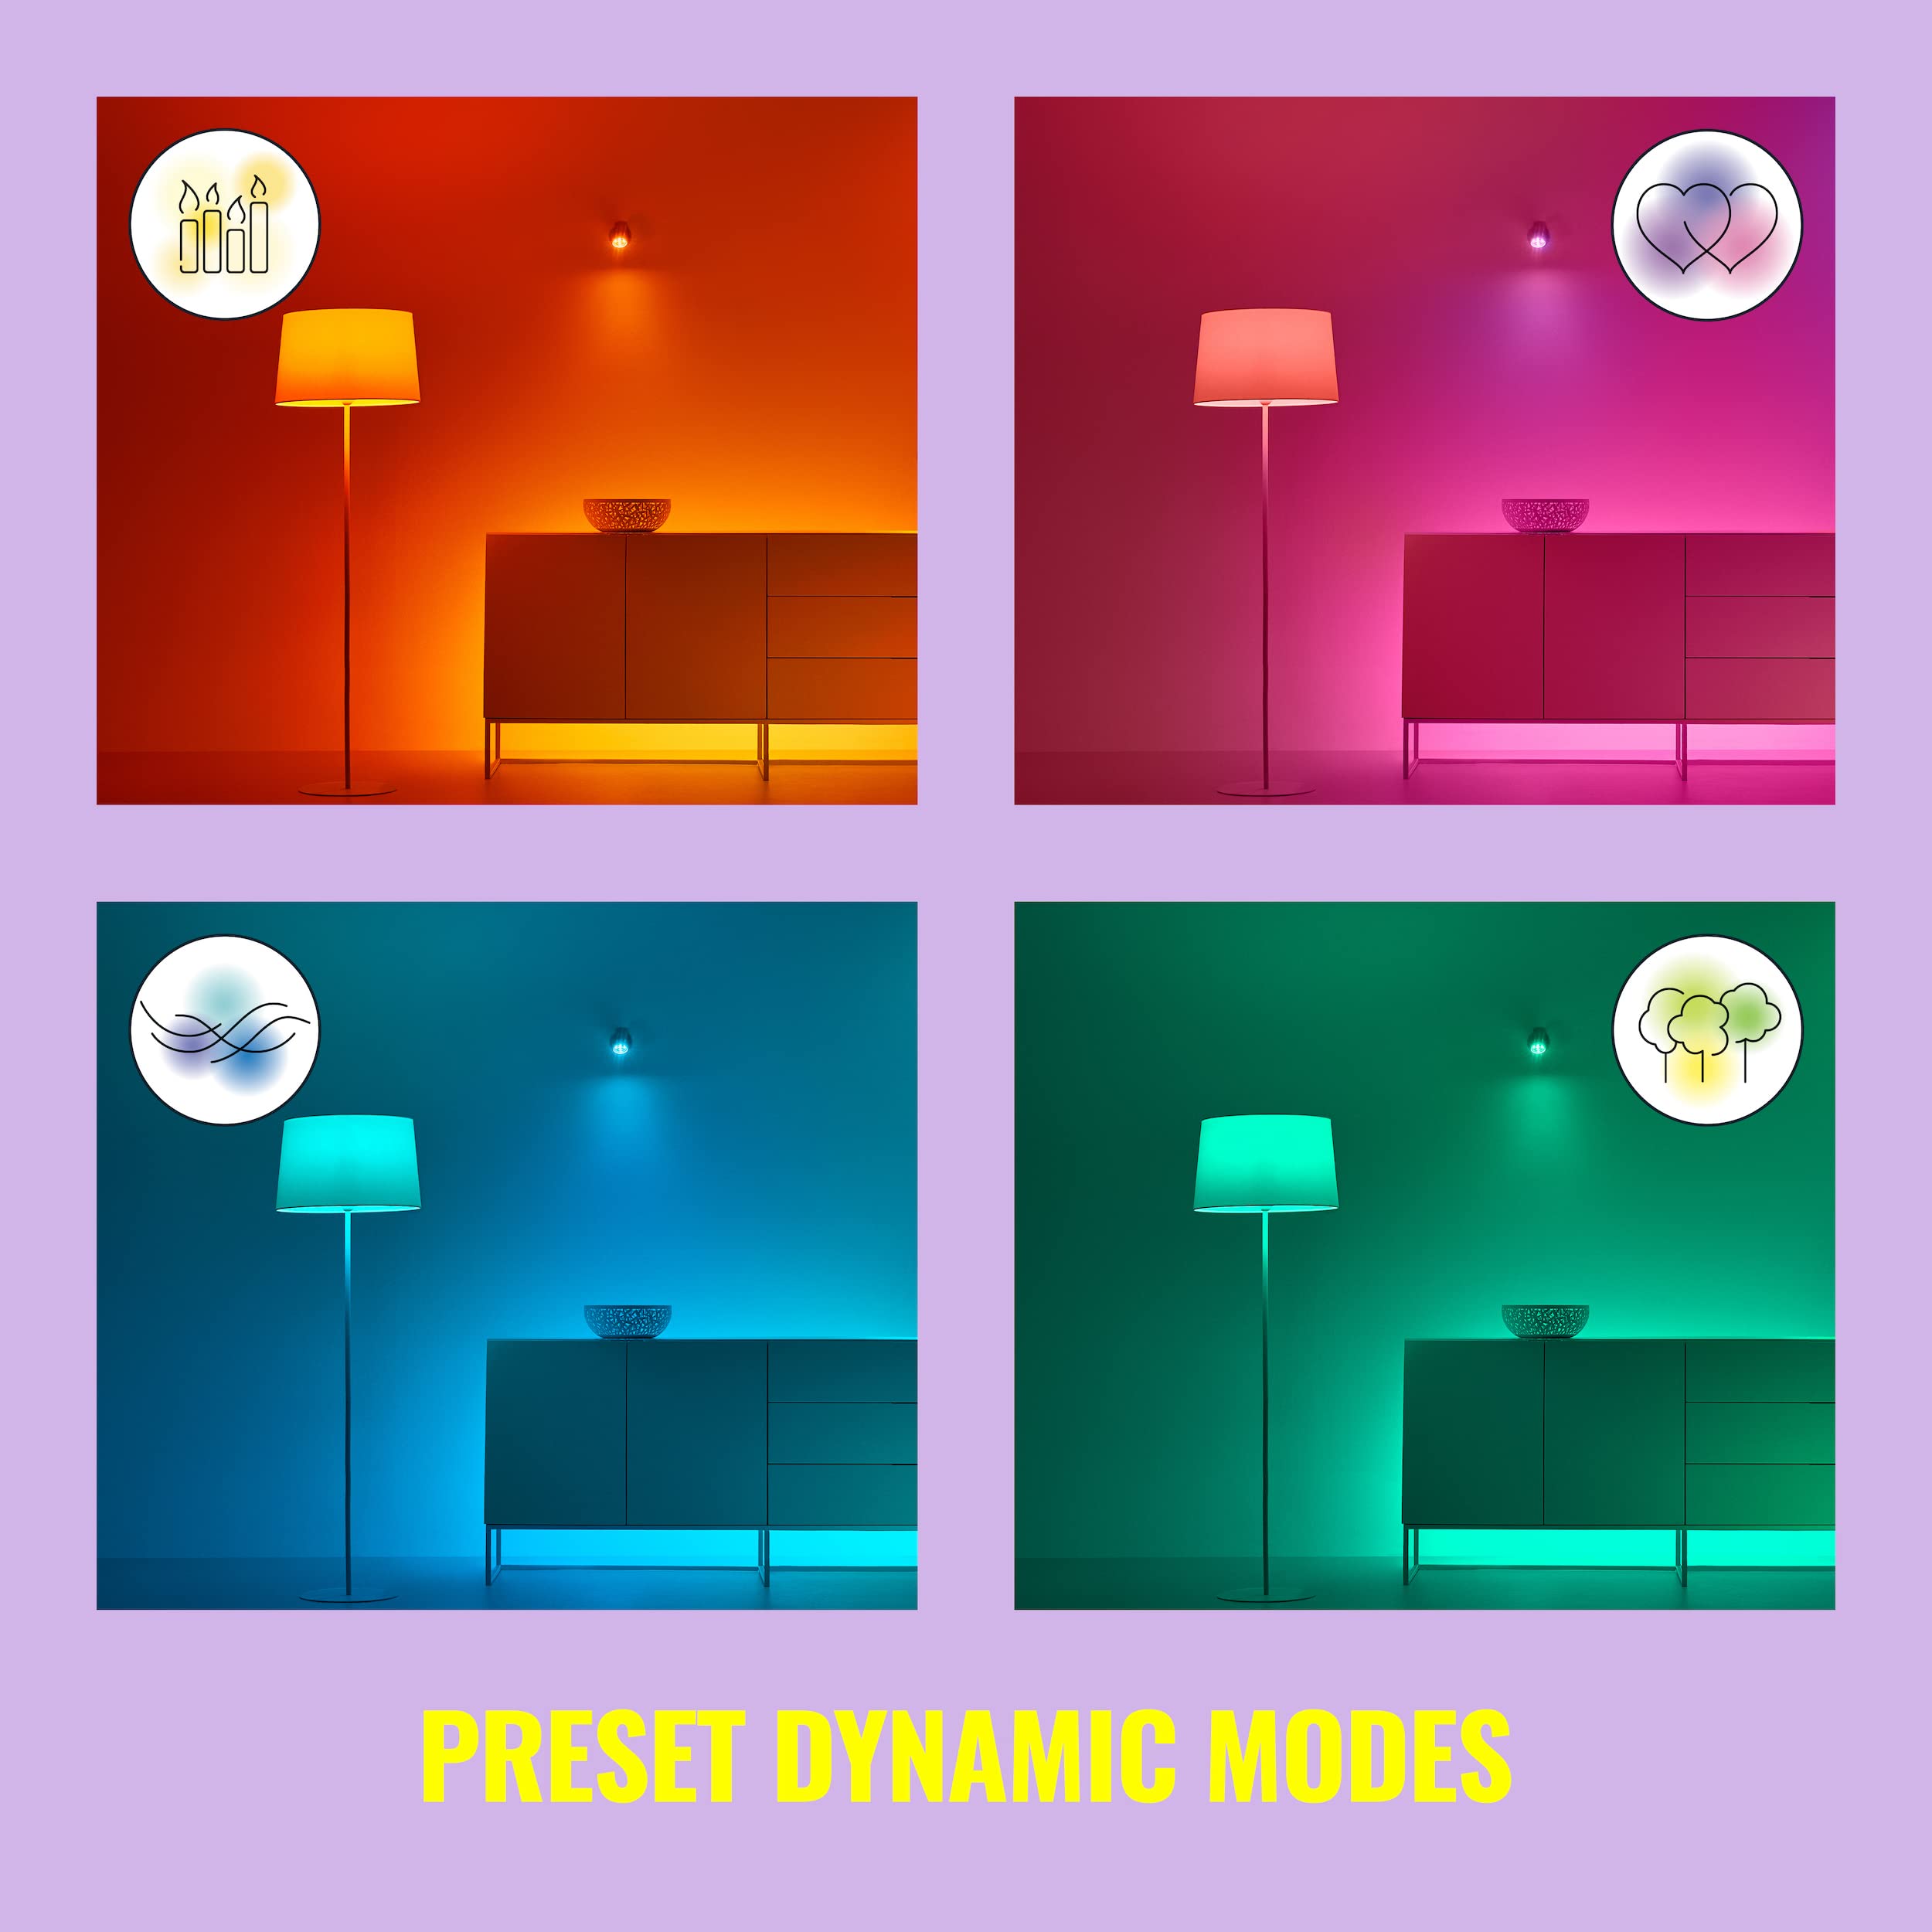 WiZ Pole Floor Light - Pack of 1 - Portable, Smart, Full-Color LED Light - Connects to Your Existing Wi-Fi - Control with Voice or App - Works with Google Home, Alexa and Siri Shortcuts